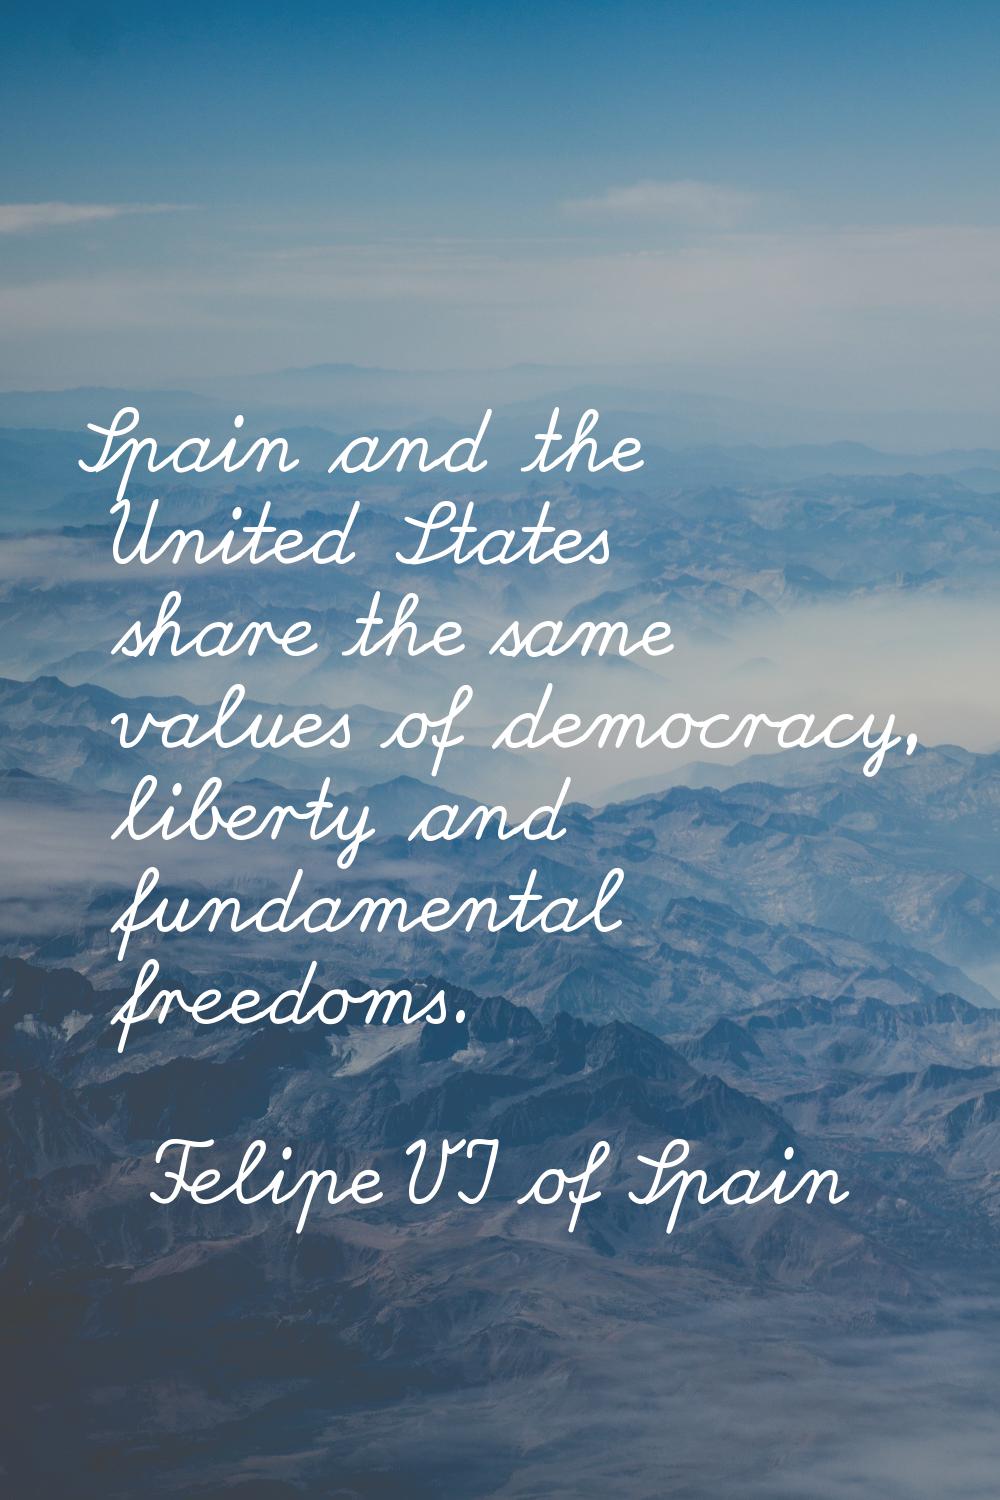 Spain and the United States share the same values of democracy, liberty and fundamental freedoms.